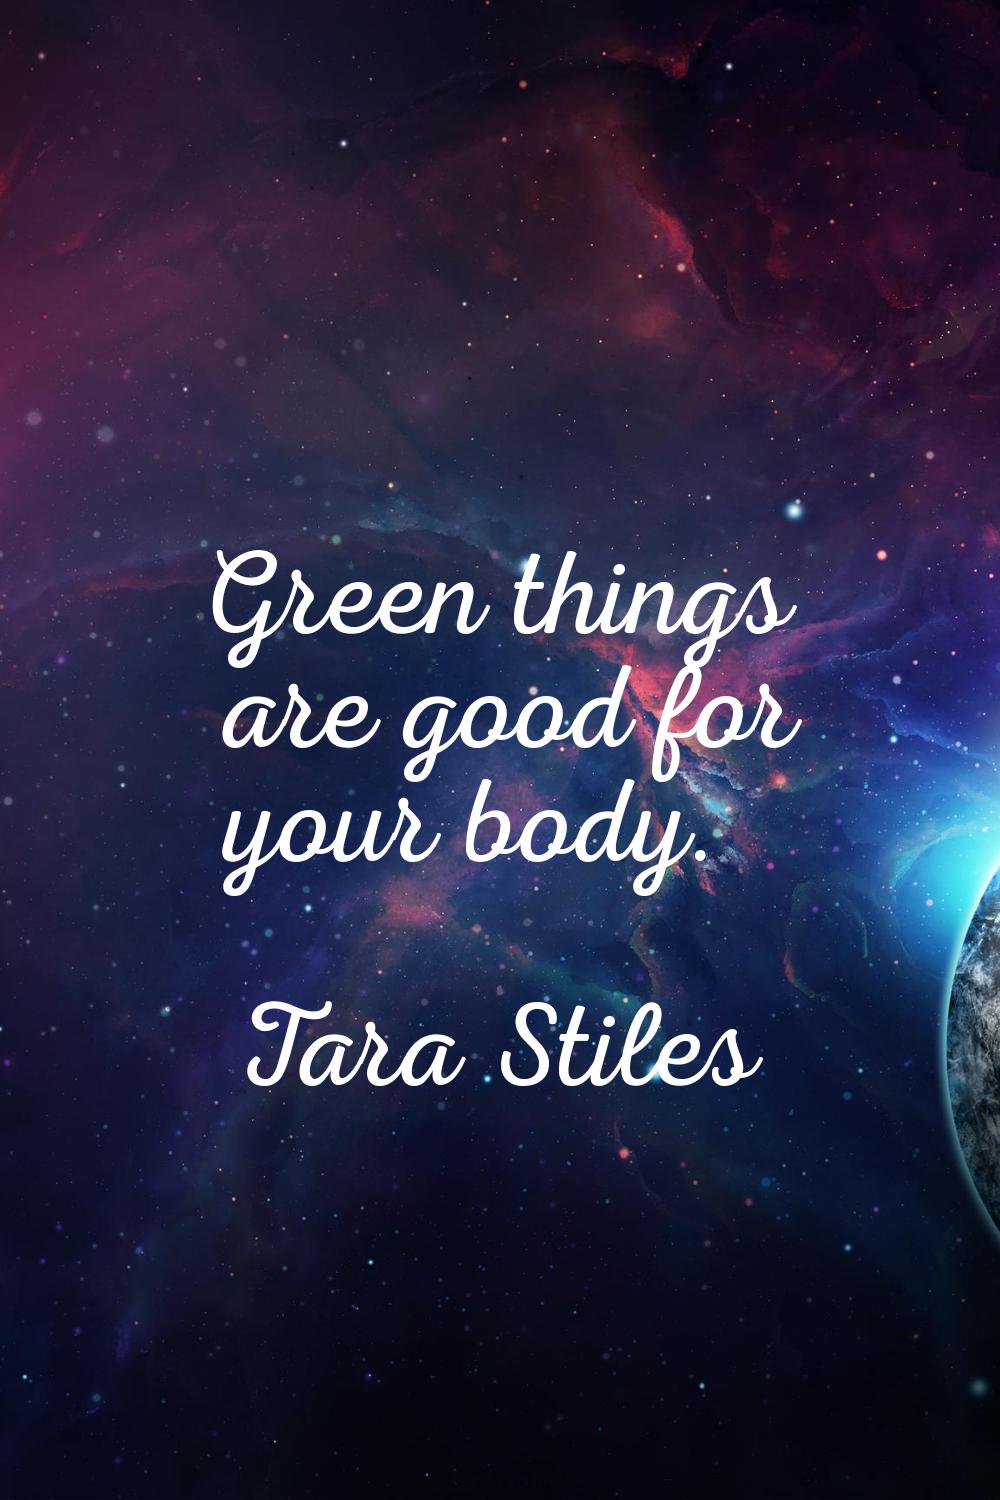 Green things are good for your body.